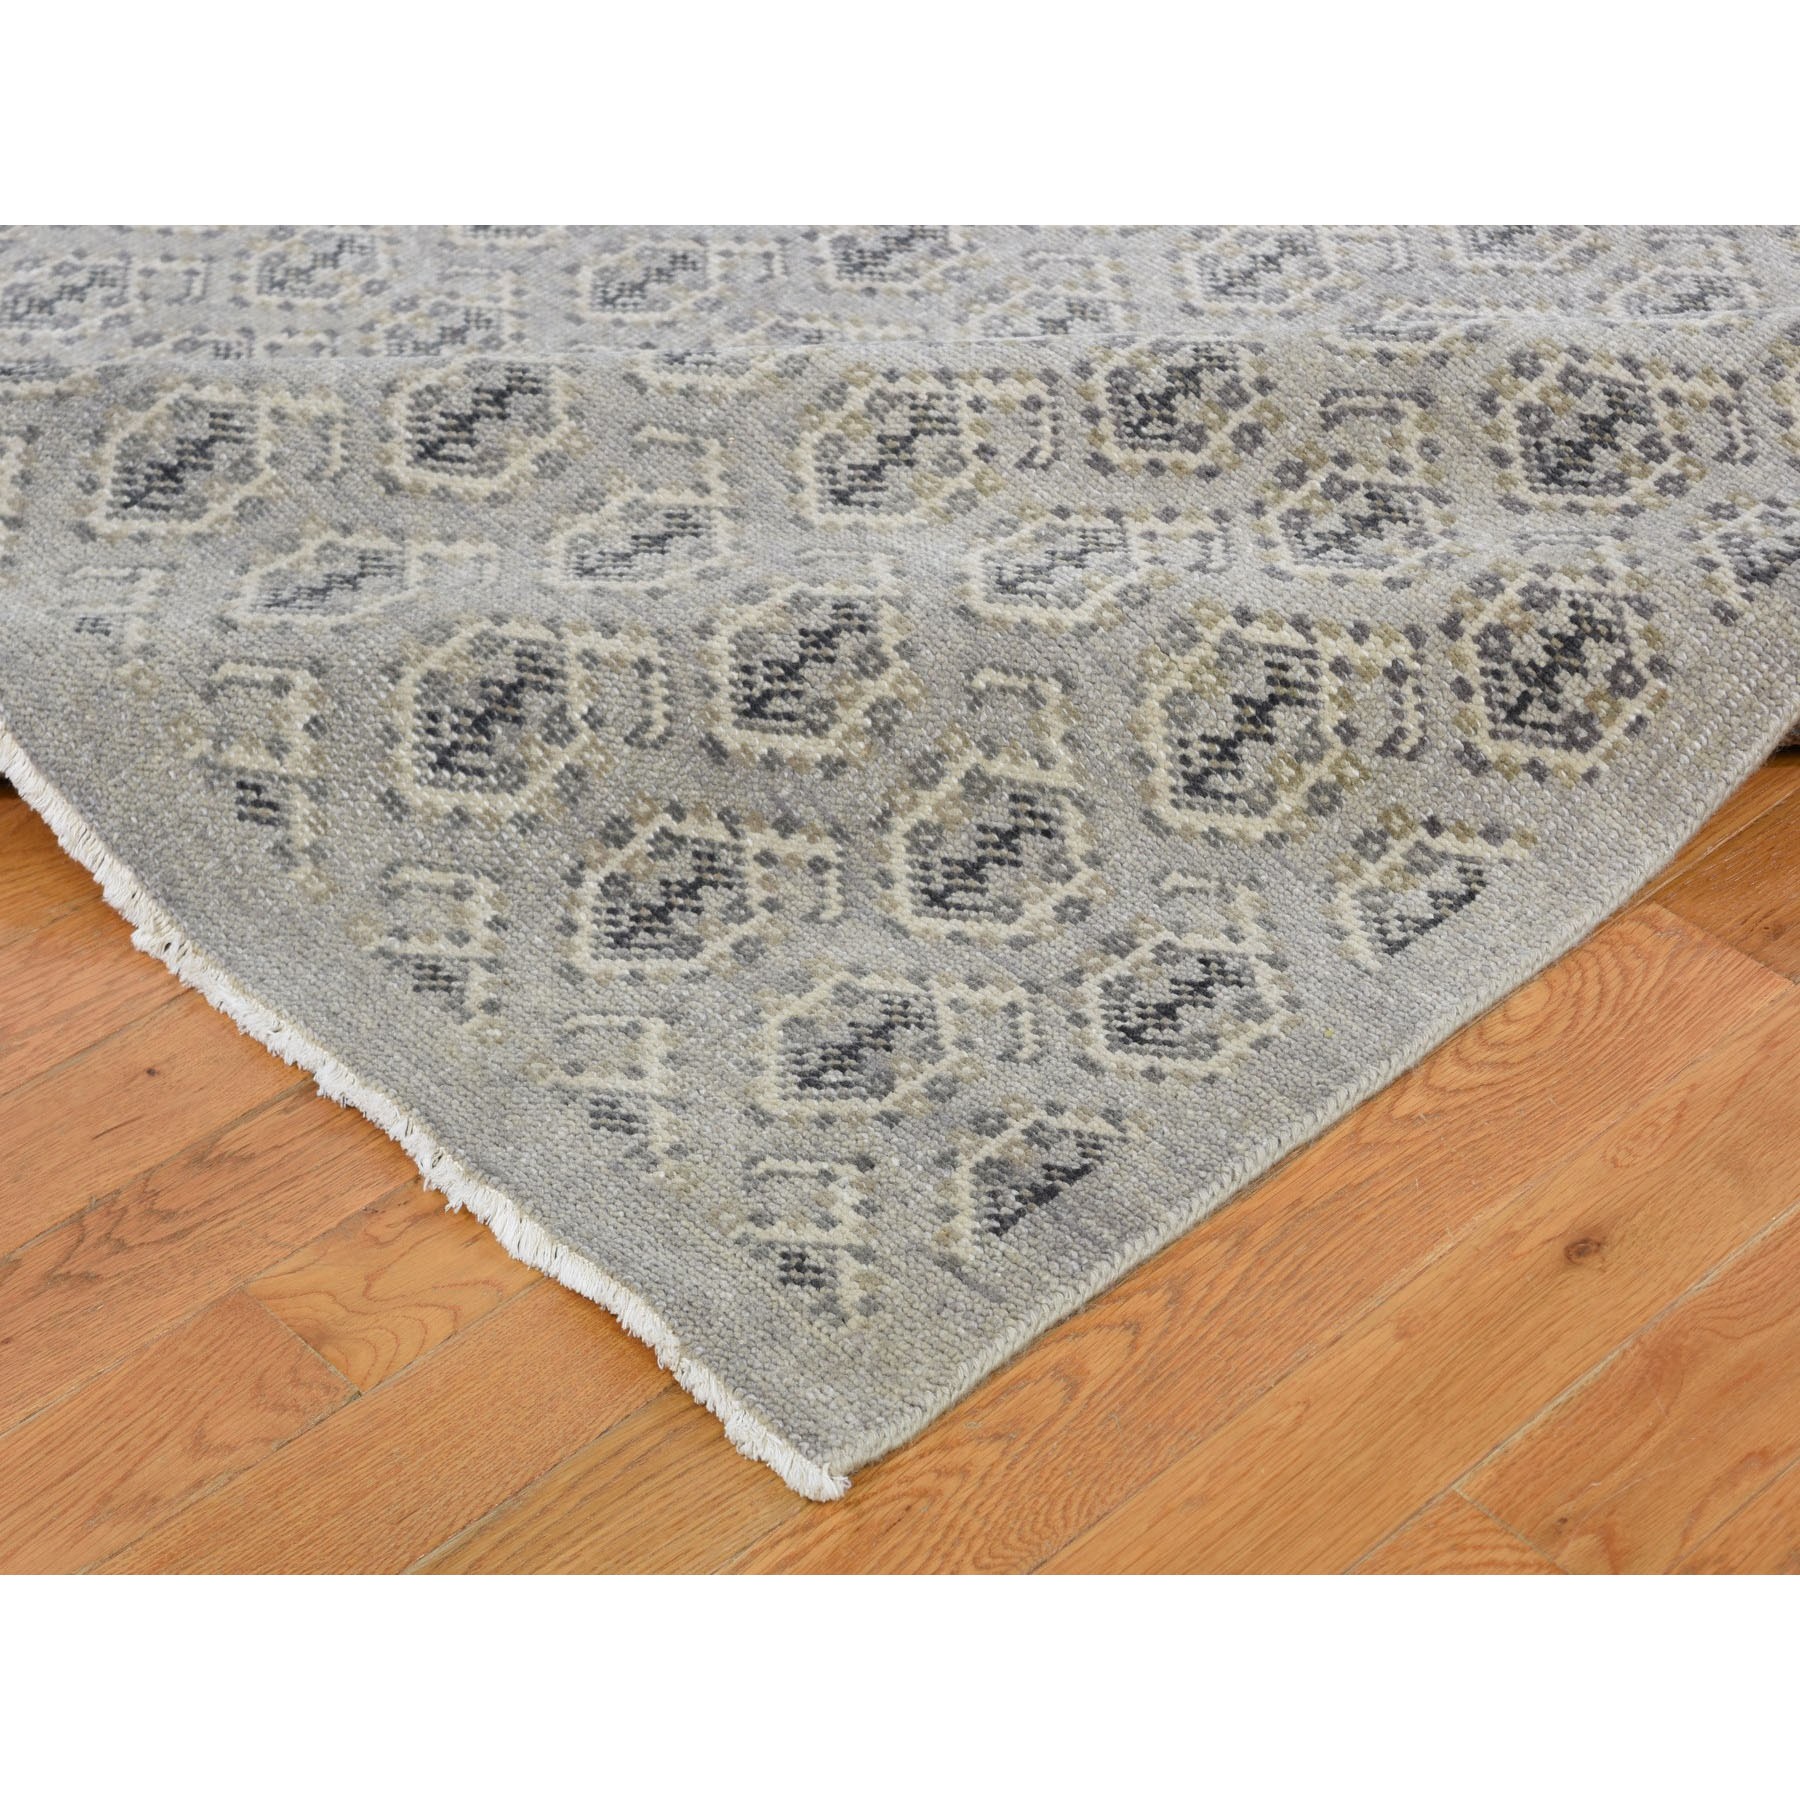 10-x13-9  Gray Paisley Design Turkish Knot Pure Wool Hand Knotted Oriental Rug 